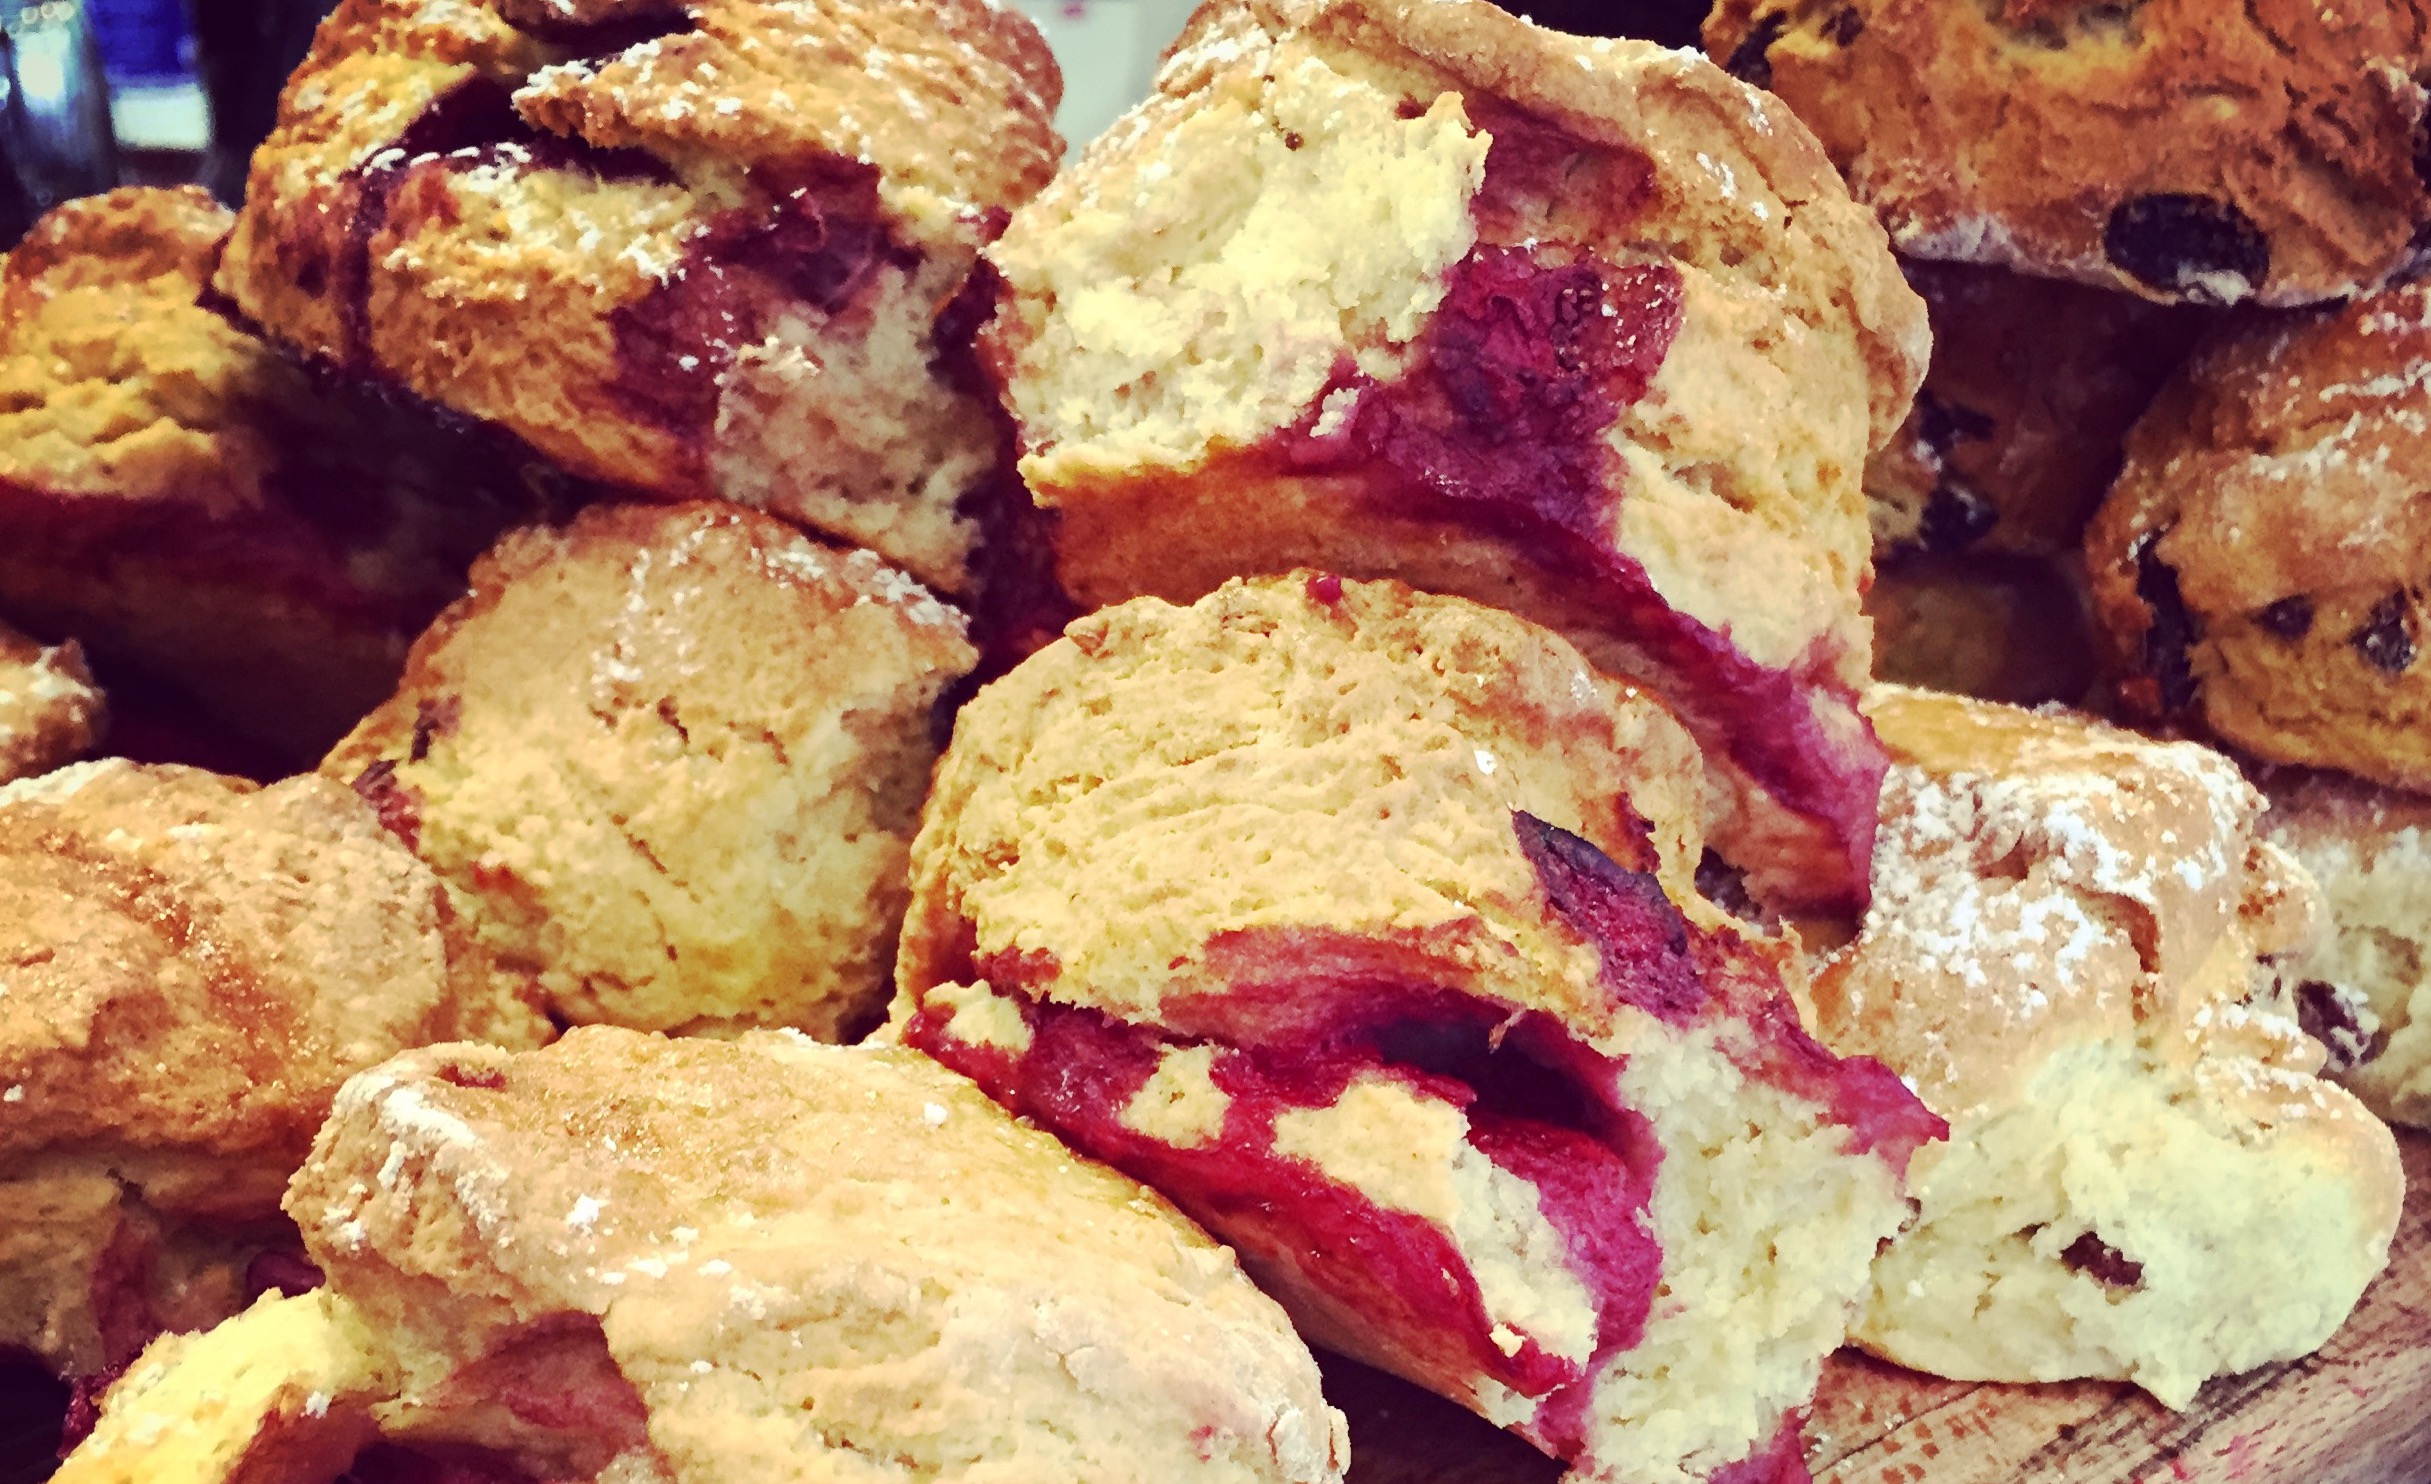 Picture of multiple scones with raspberries oozing out of them